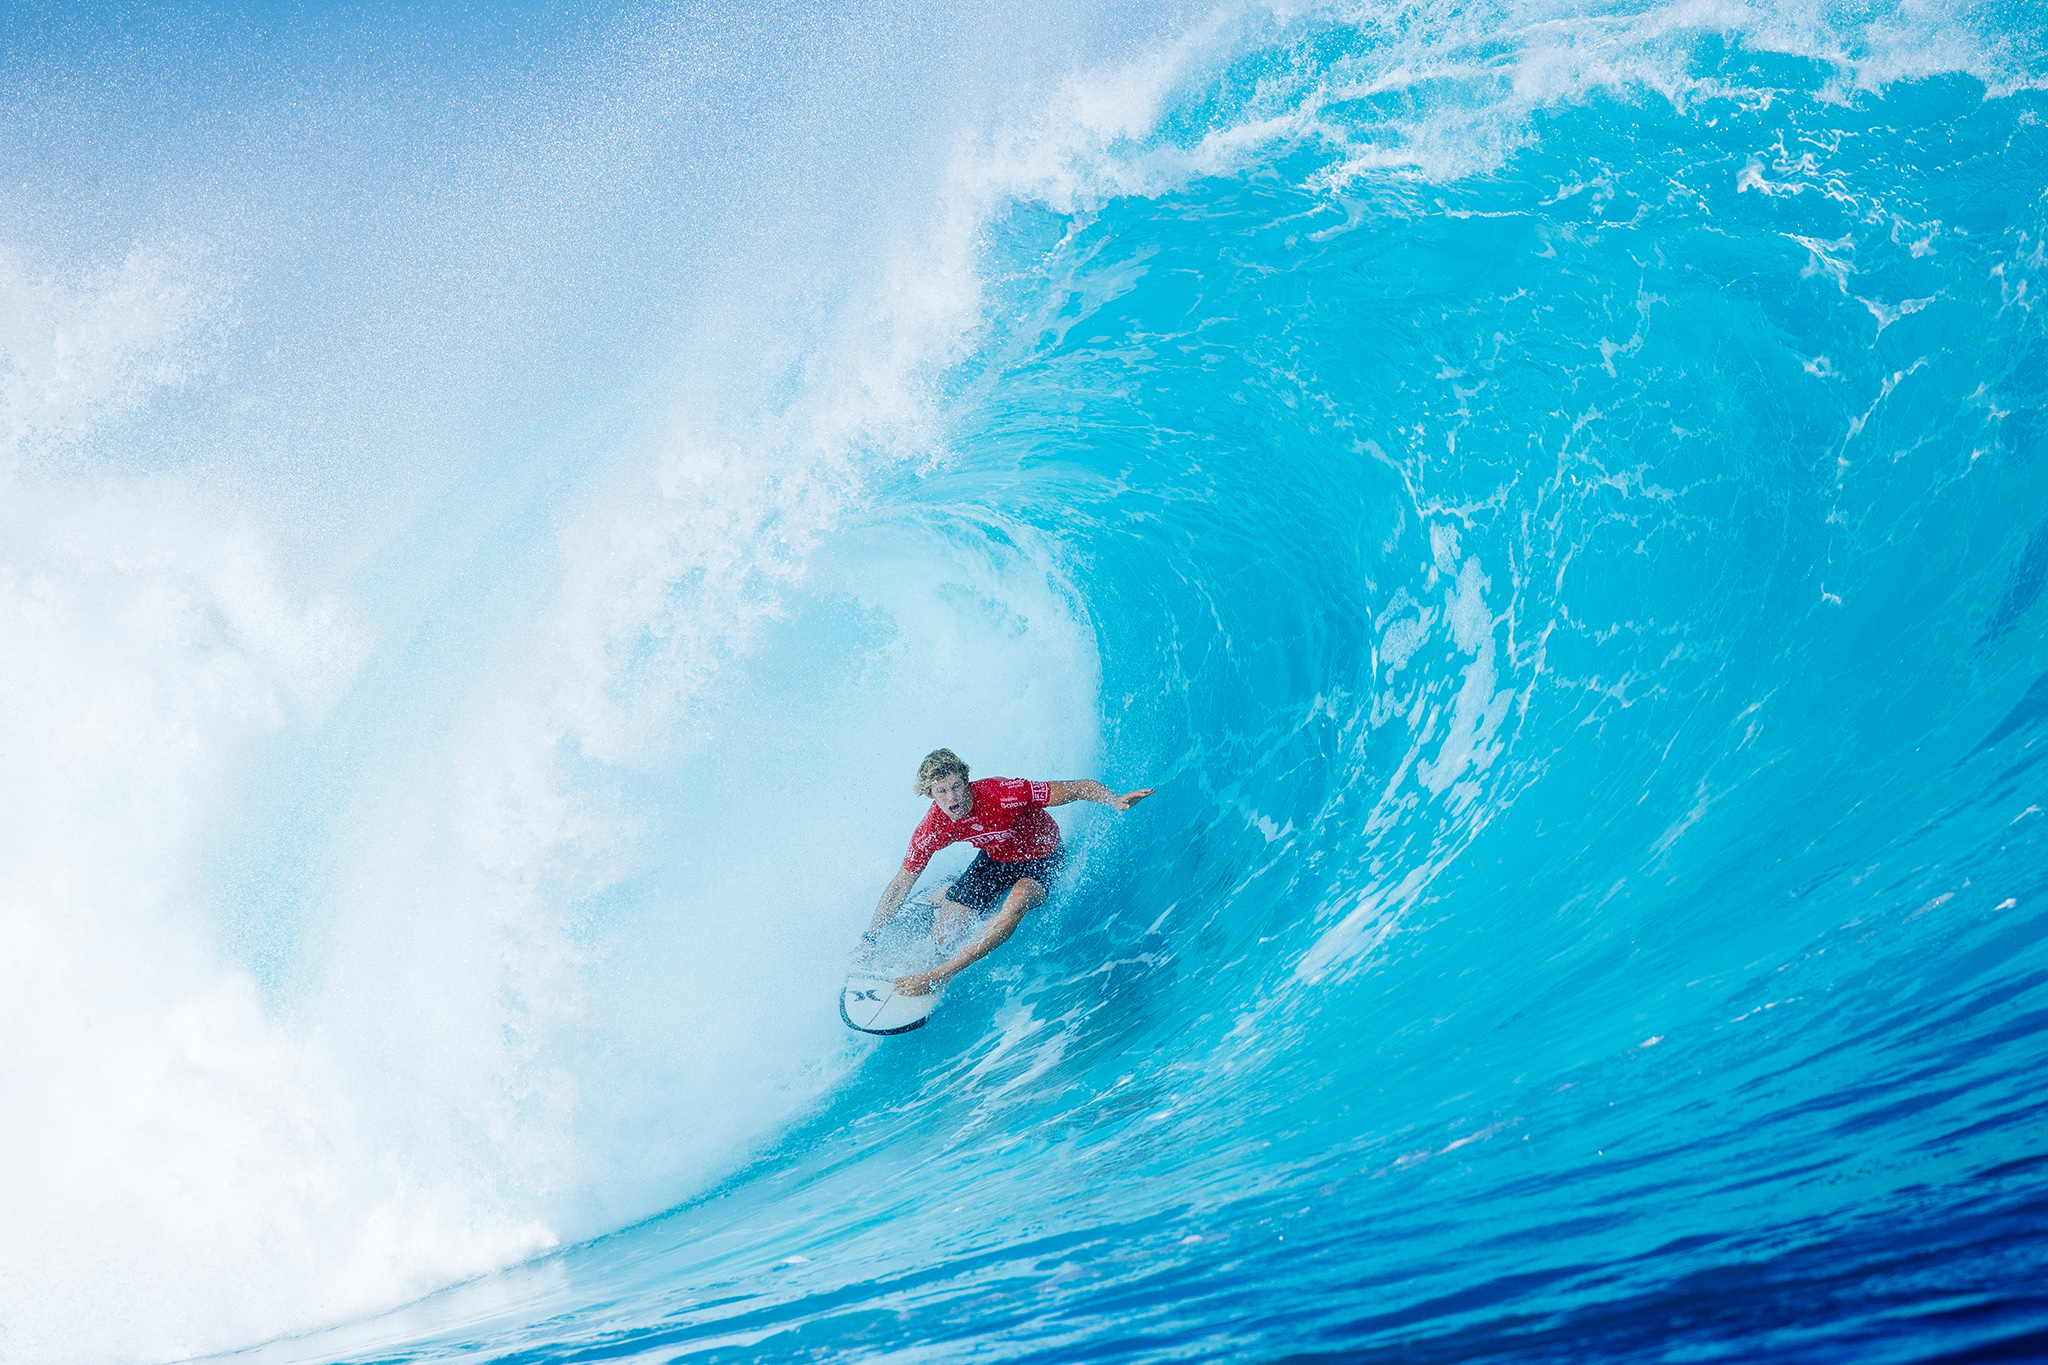 John John Florence of Hawaii (pictured) winning his Round Four heat at the Fiji Pro at Cloudbreak on Thursday June 16, 2016. PHOTO: © WSL/ Sloane SOCIAL: @edsloanephoto This image is the copyright of the World Surf League and is provided royalty free for editorial use only, in aall media now known or hereafter created. No commercial rights granted. Sale or license of the images is prohibited. This image is a factually accurate rendering of what it depicts and has not been modified or augmented except for standard cropping and toning. ALL RIGHTS RESERVED.